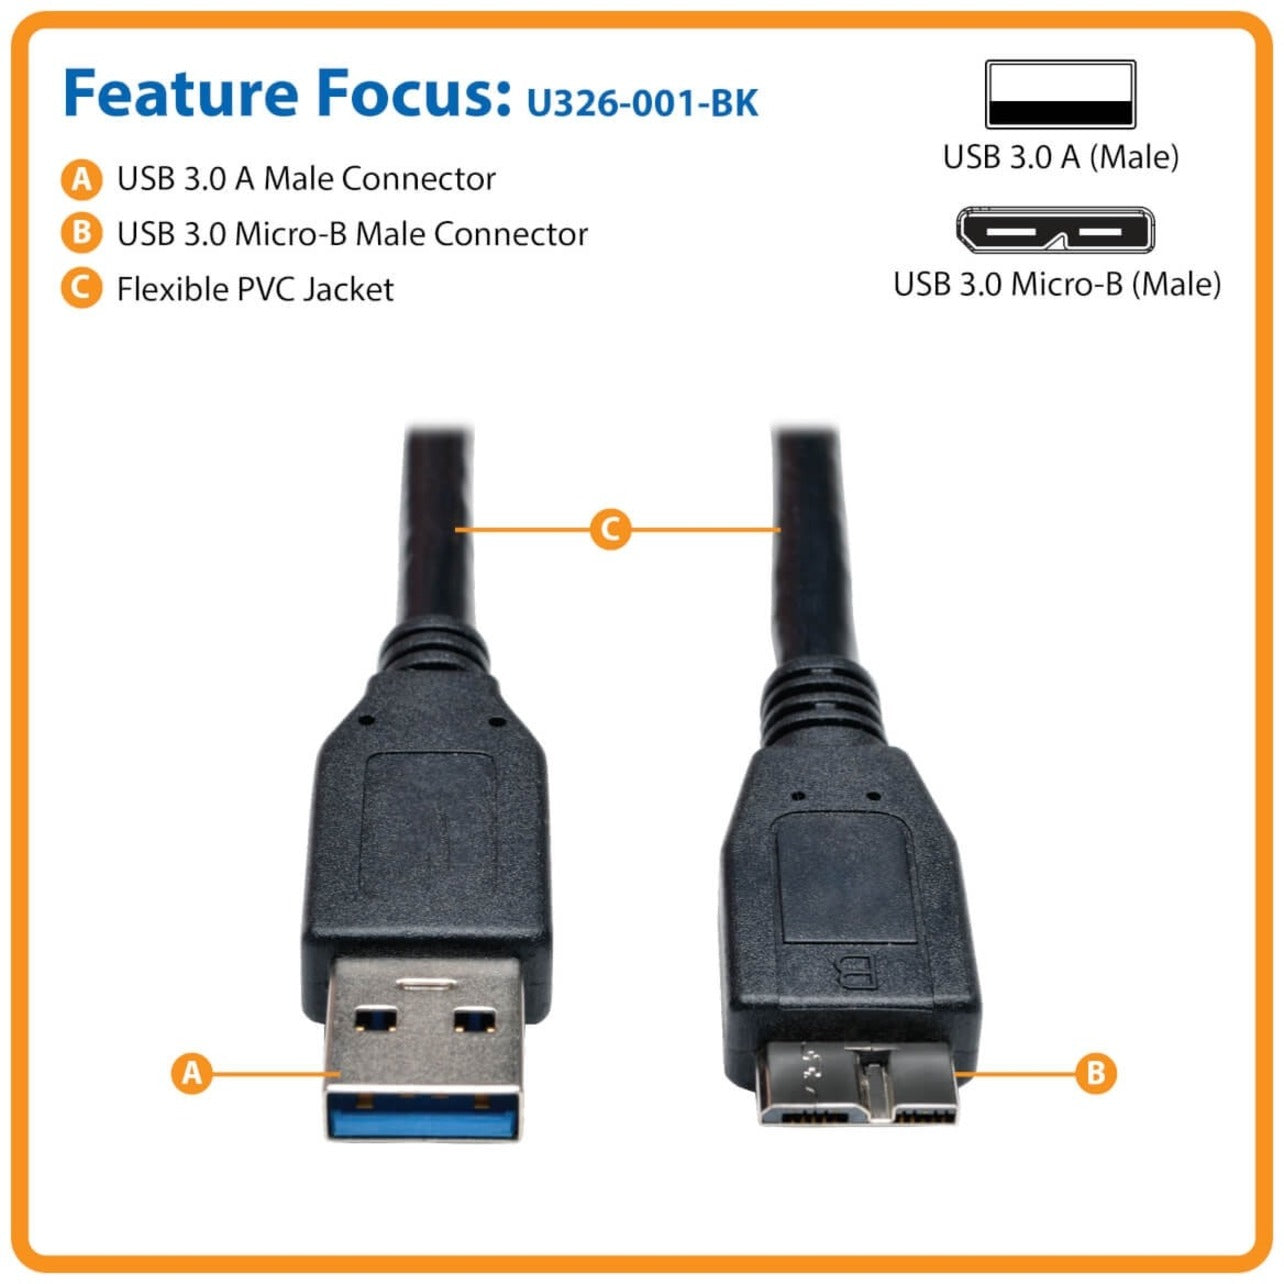 Tripp Lite U326-001-BK USB 3.0 SuperSpeed Device Cable (A to Micro-B M/M), Black, 1-ft.